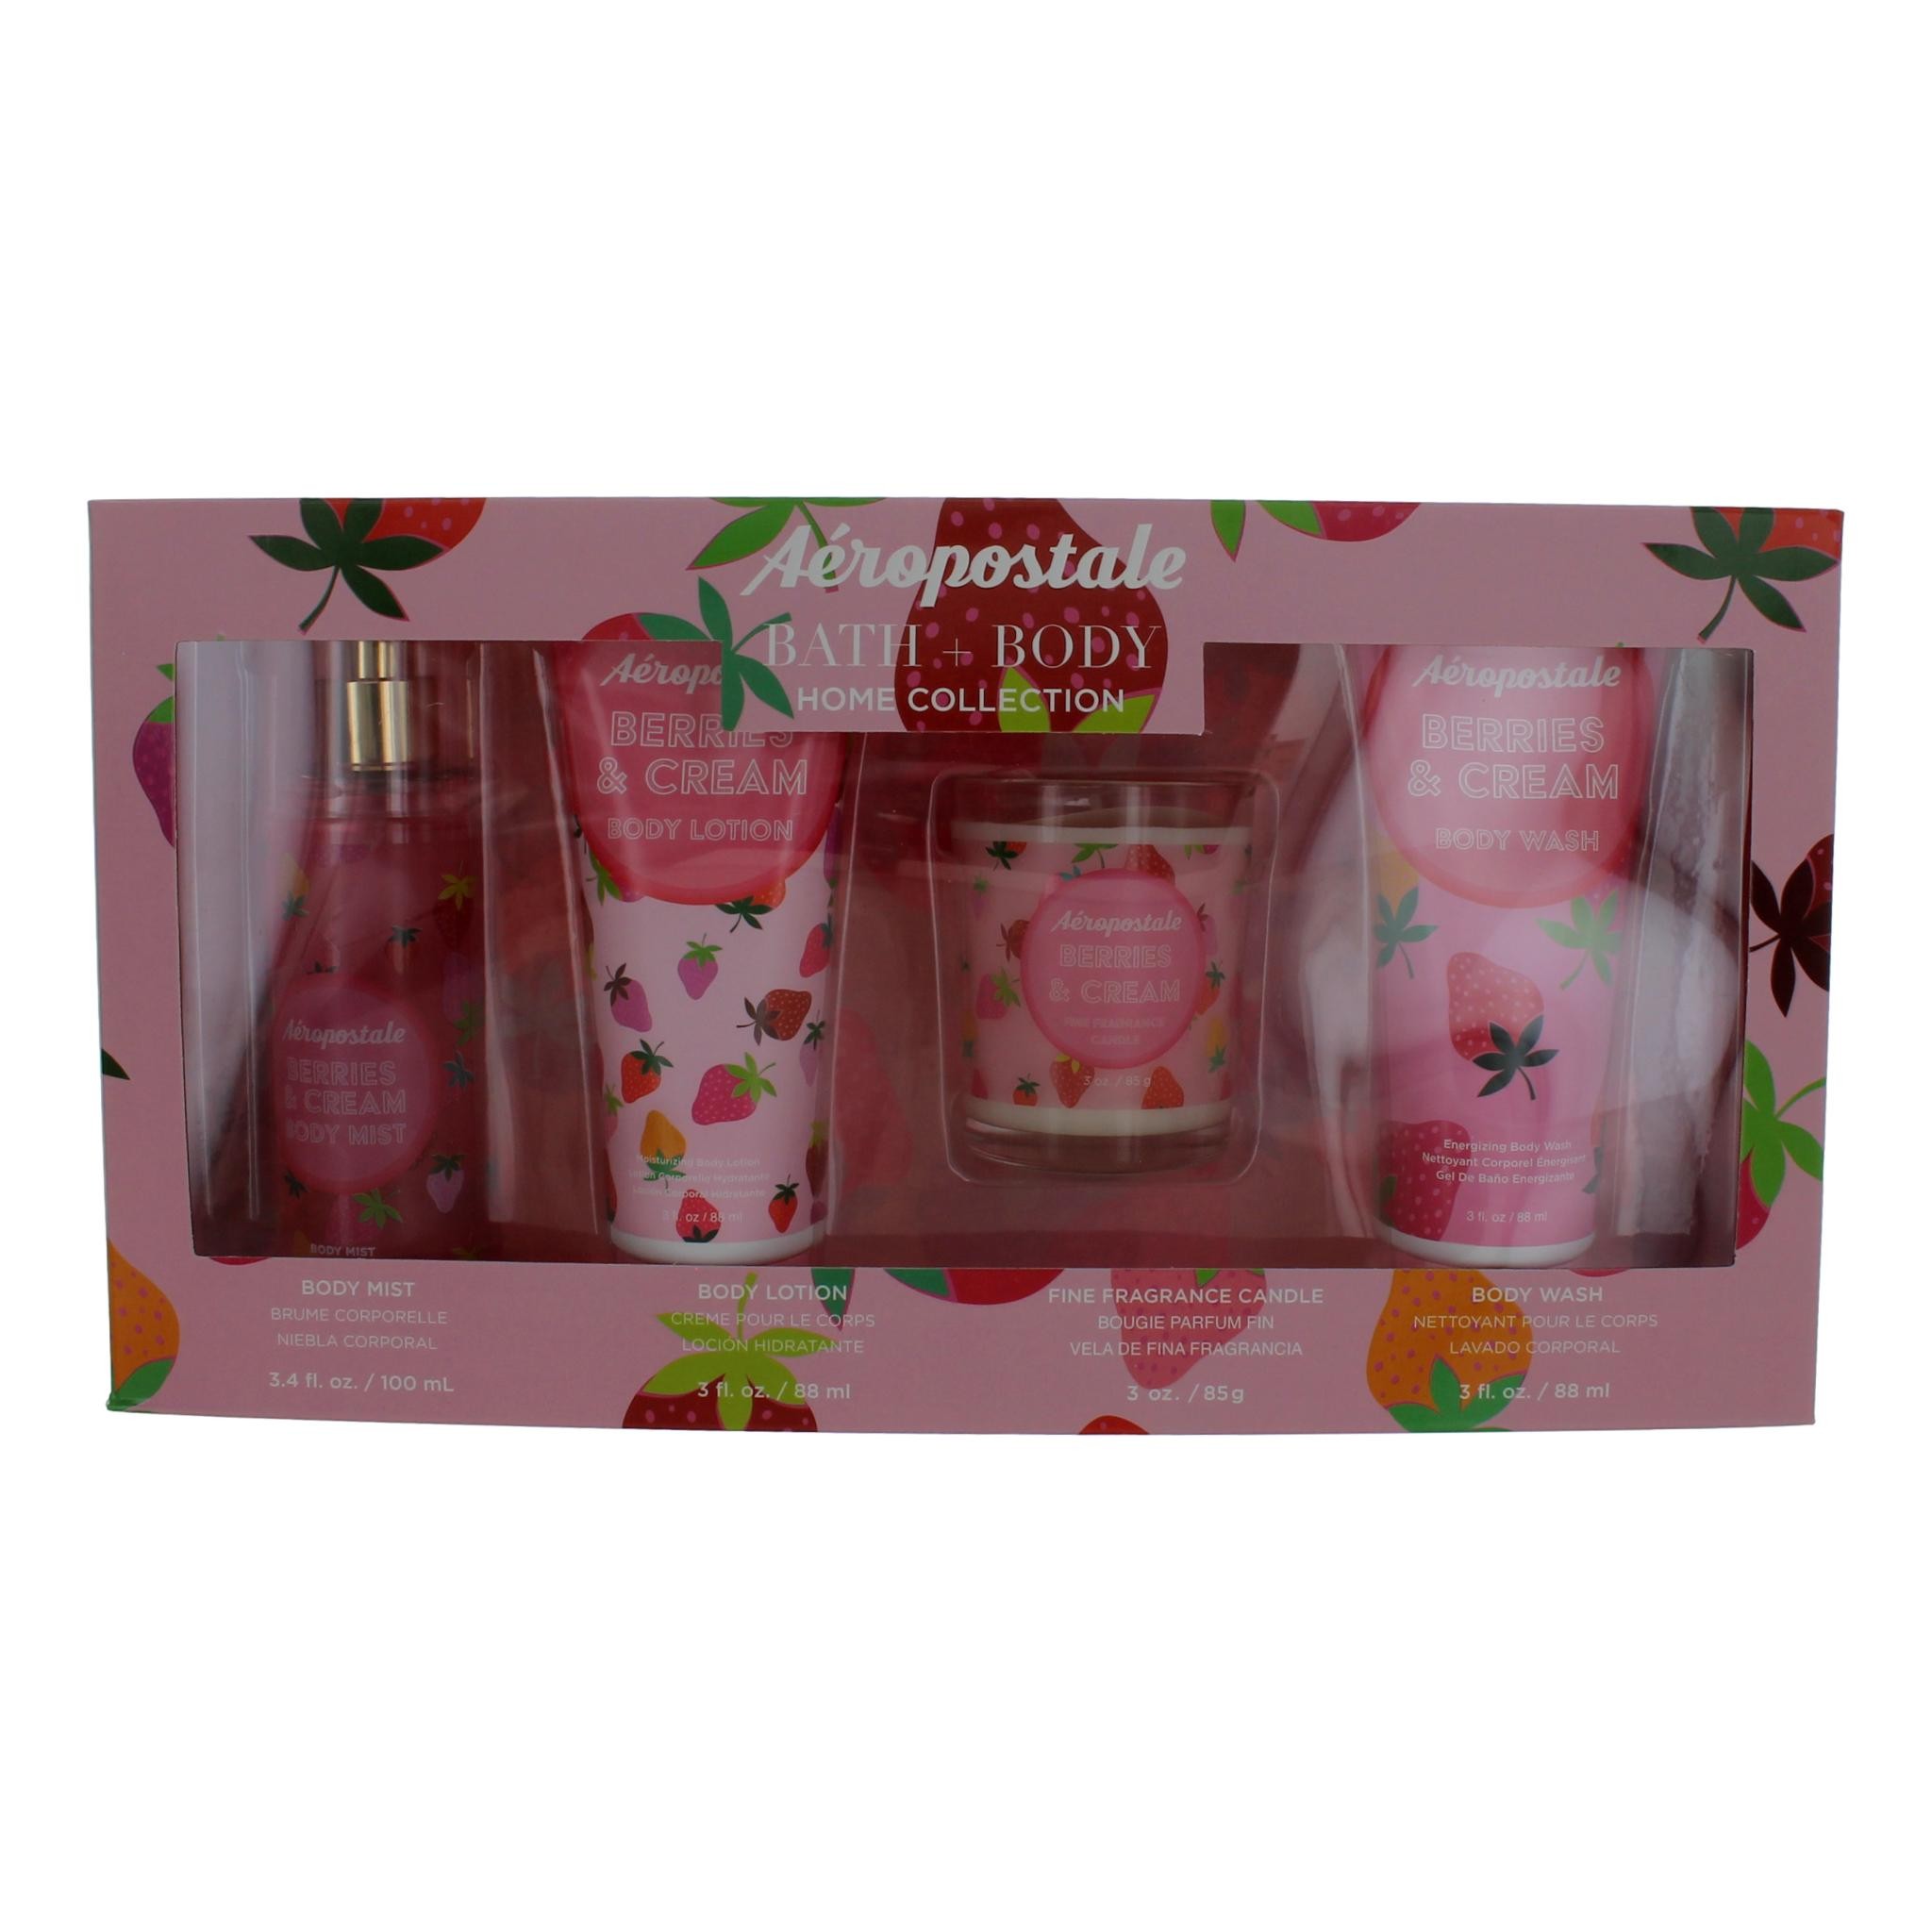 Aeropostale Bath+Body Home Collection by Aeropostale 4 Piece Gift Set